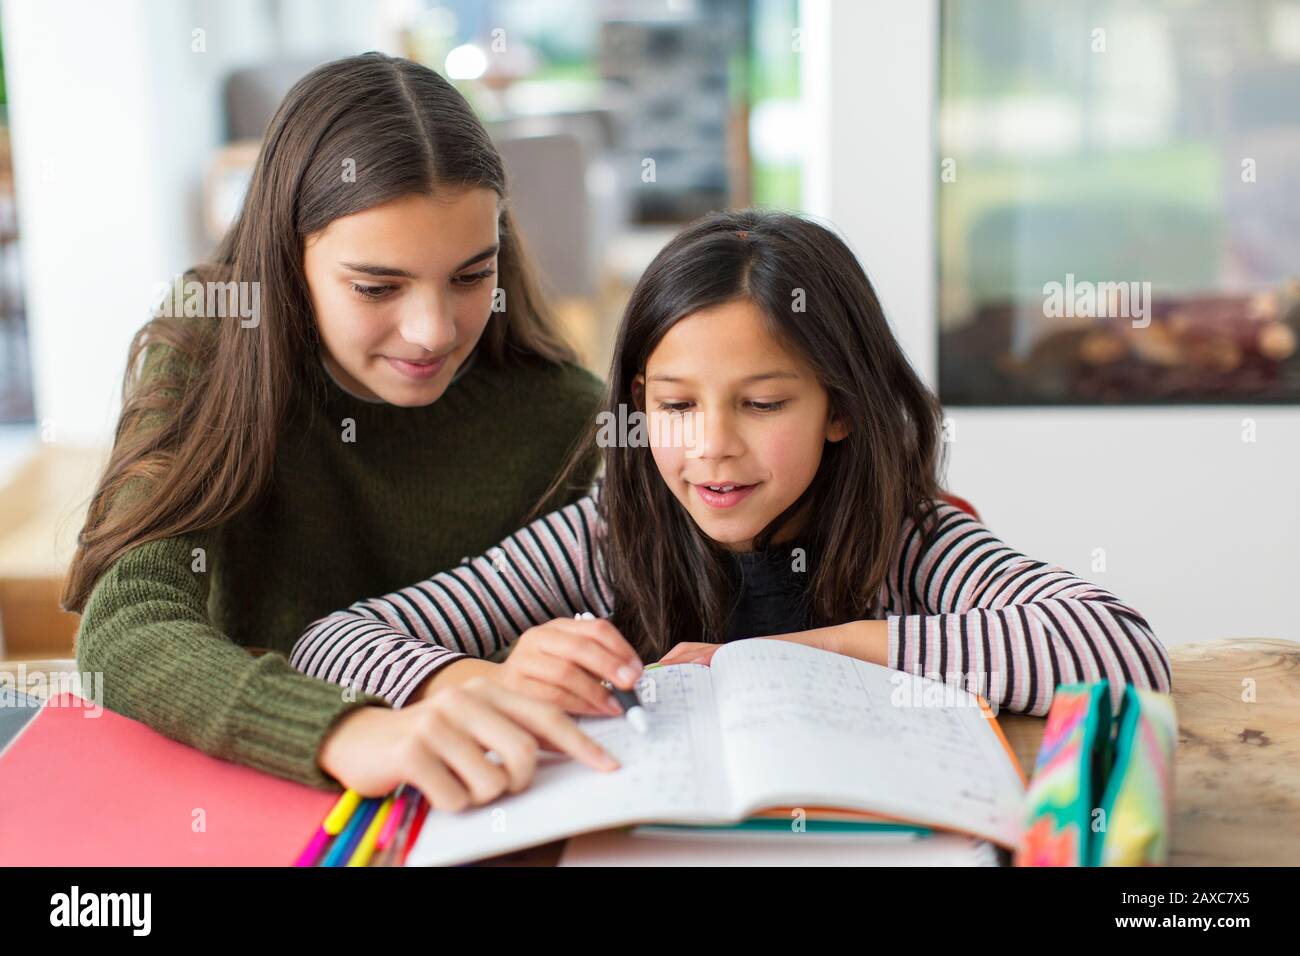 Girl helping young sister with homework Stock Photo